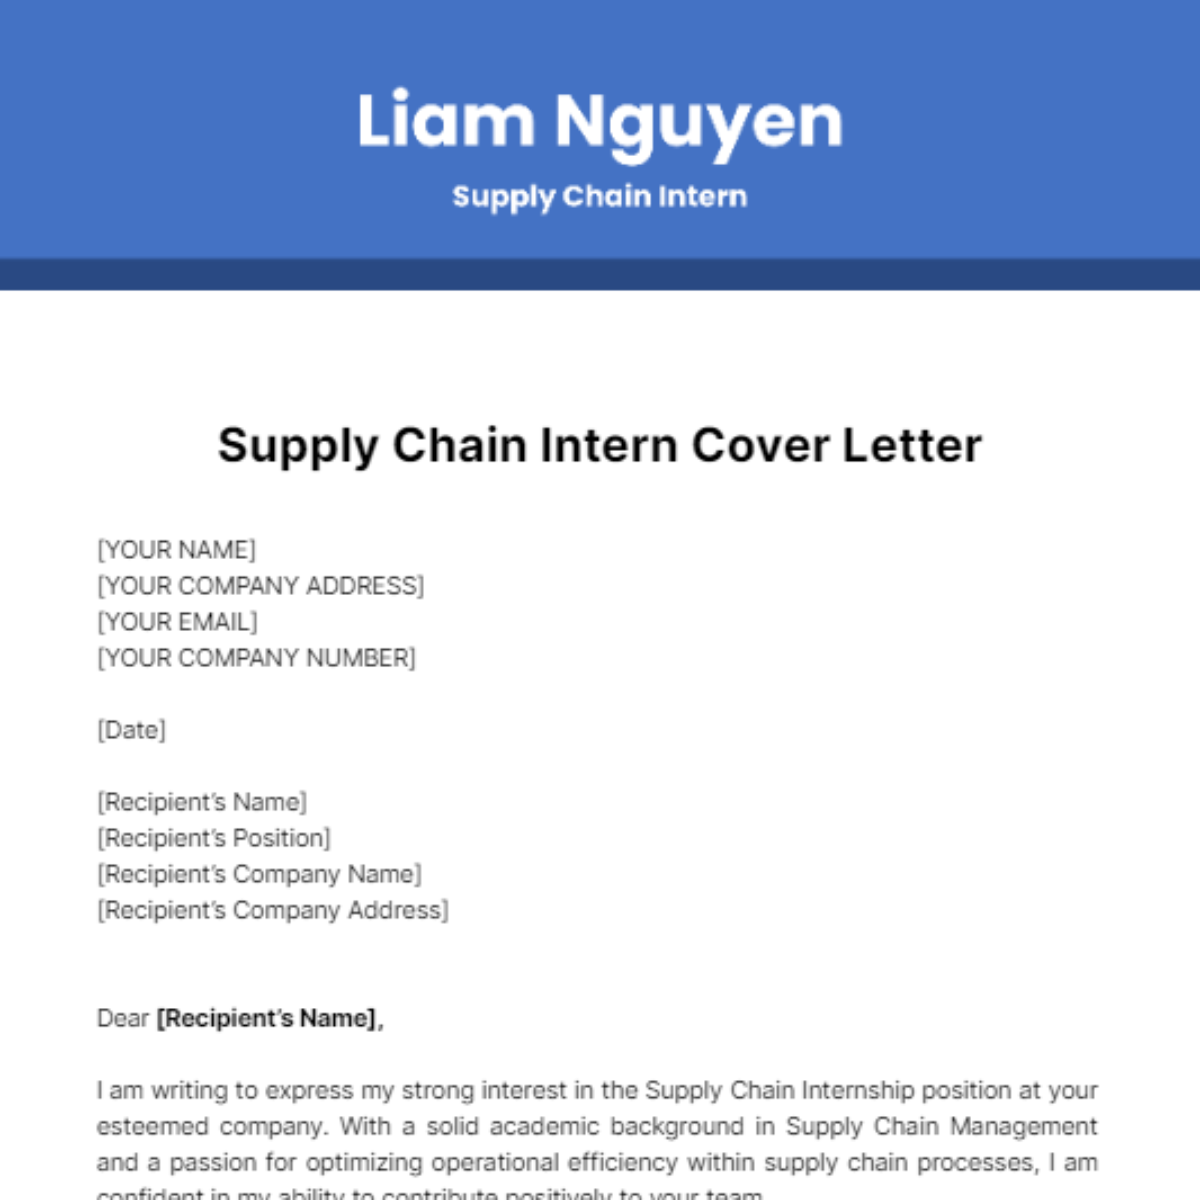 Supply Chain Intern Cover Letter Template